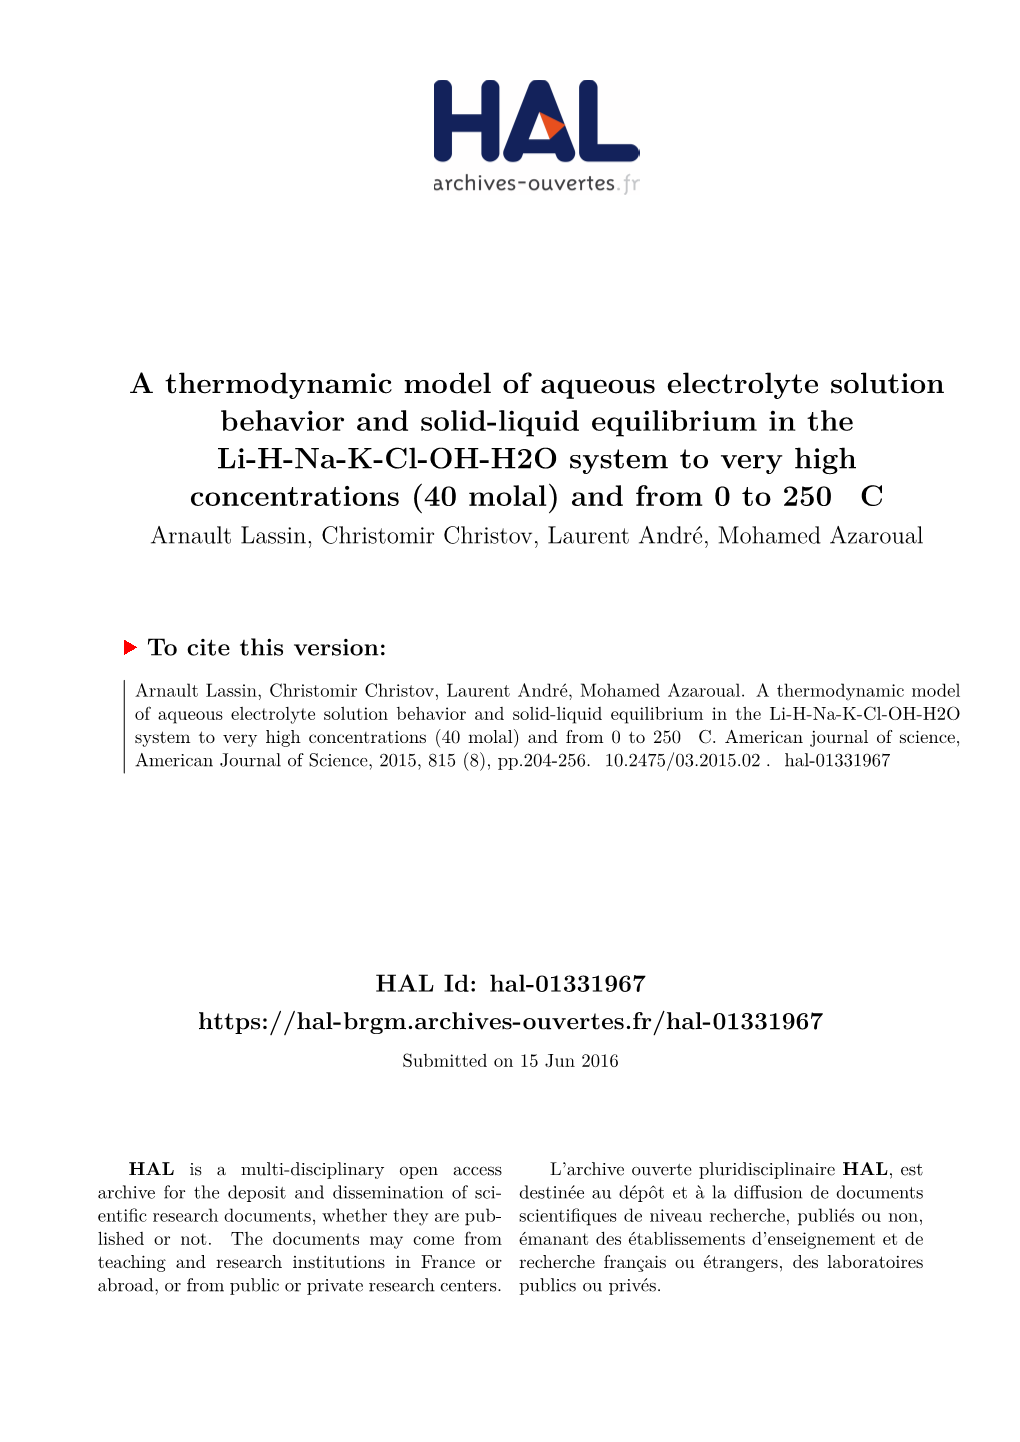 A Thermodynamic Model of Aqueous Electrolyte Solution Behavior And